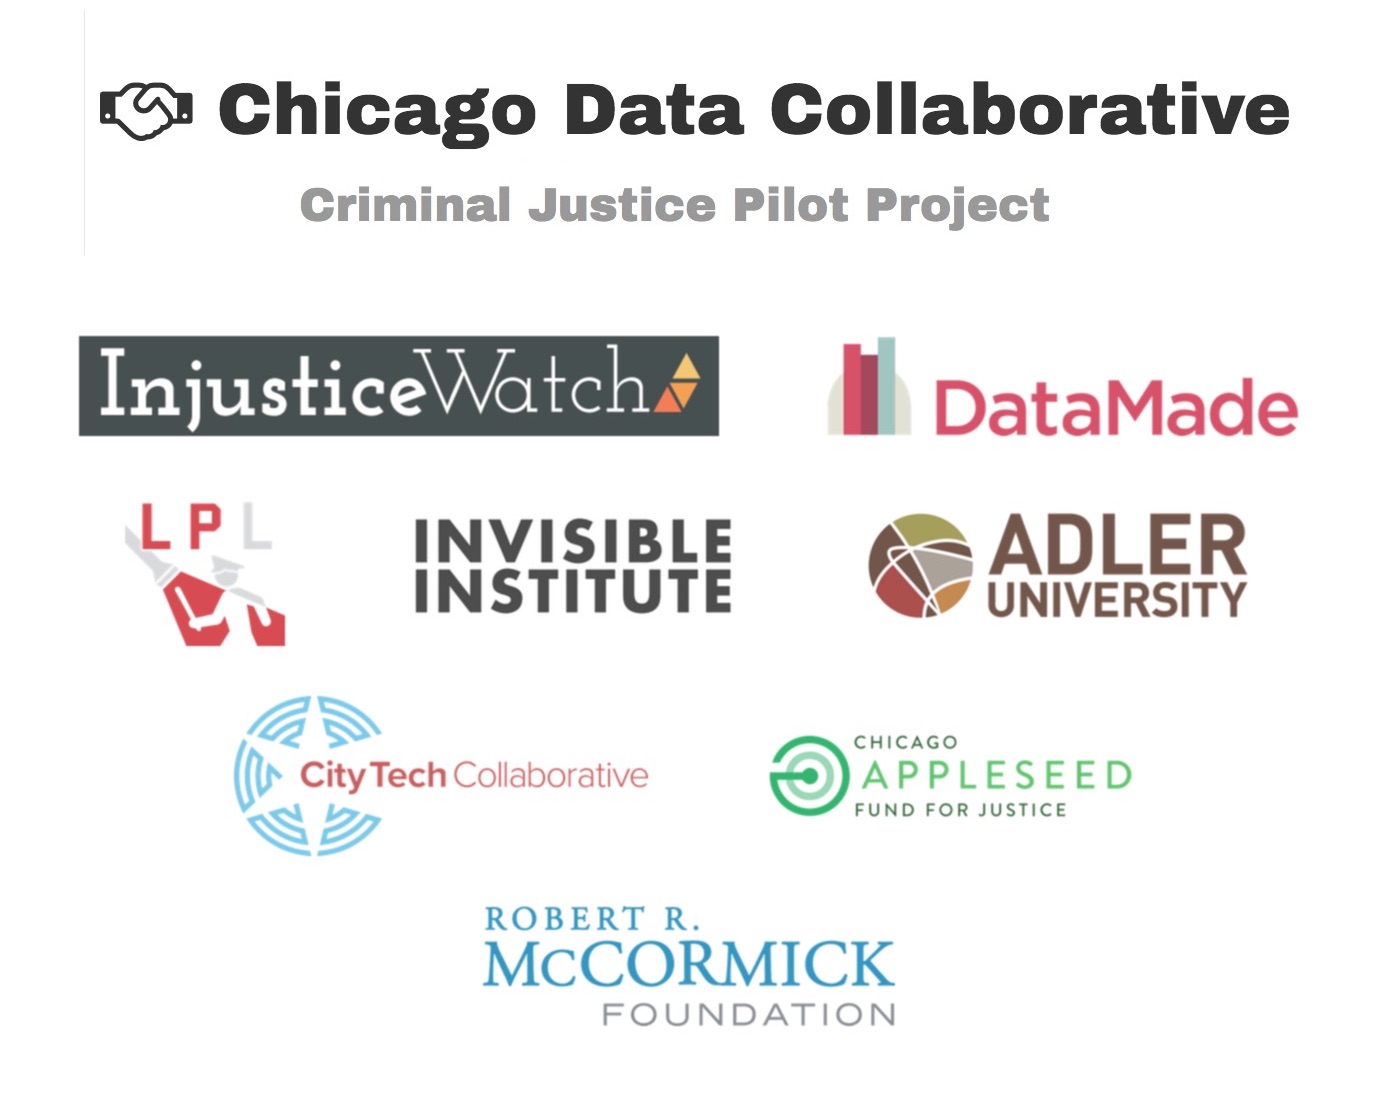 Introducing the Chicago Data Collaborative